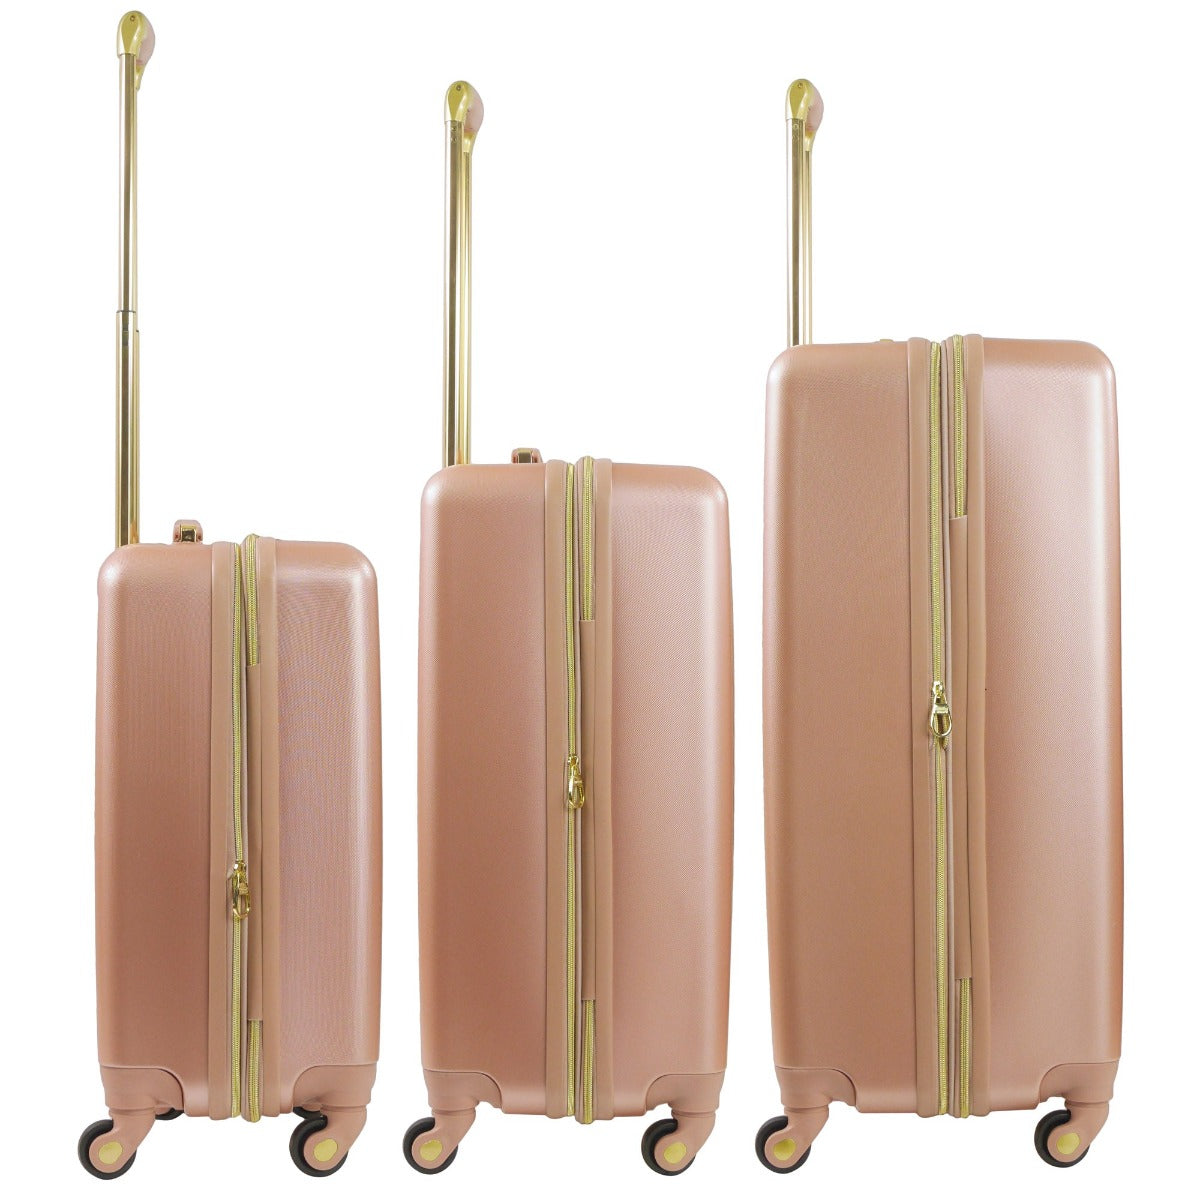 Christian Siriano New York Addie rose gold 3 piece hardside spinner luggage set - best suitcase sets for travelling